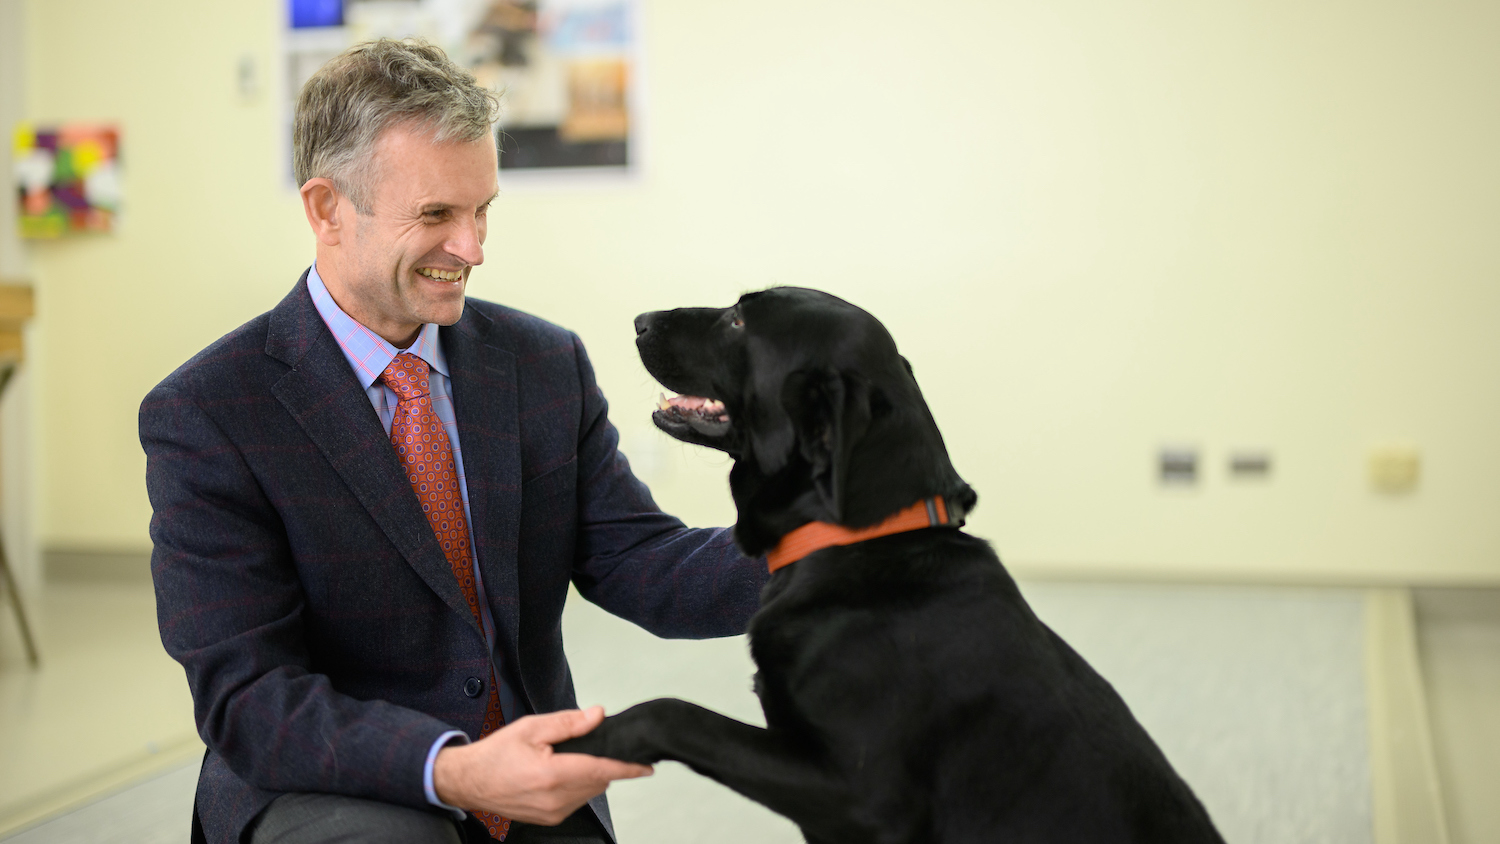 Duncan Lascelles shaking "hands" with a dog